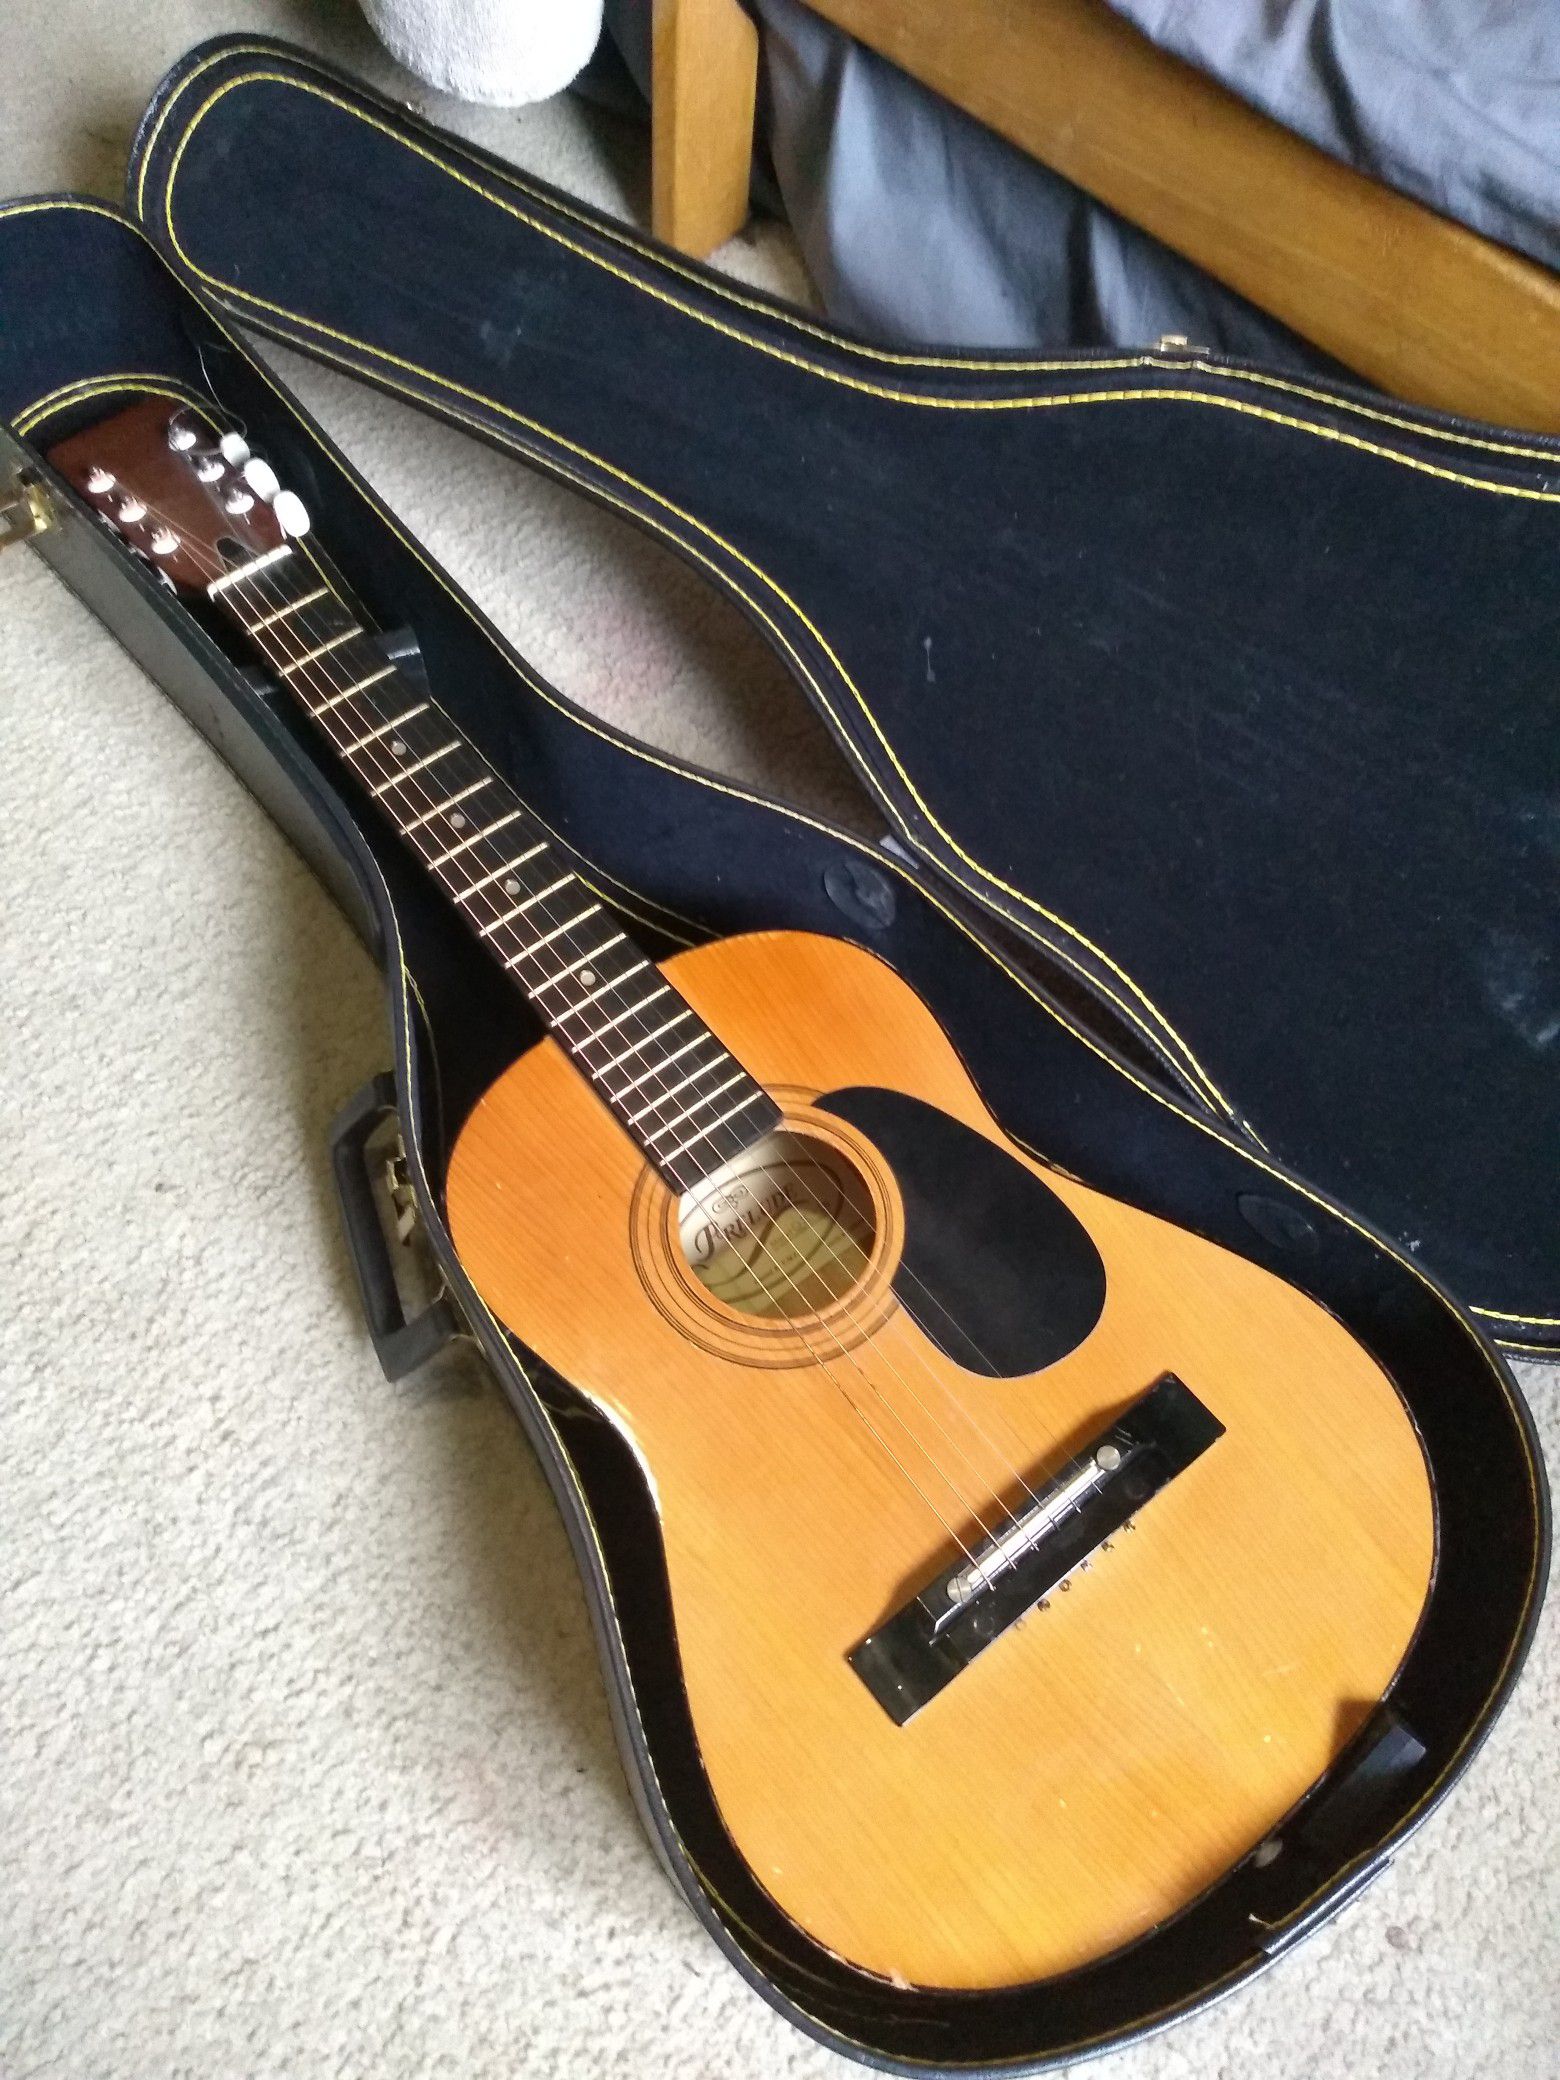 Beginner small guitar w/case and extra strings